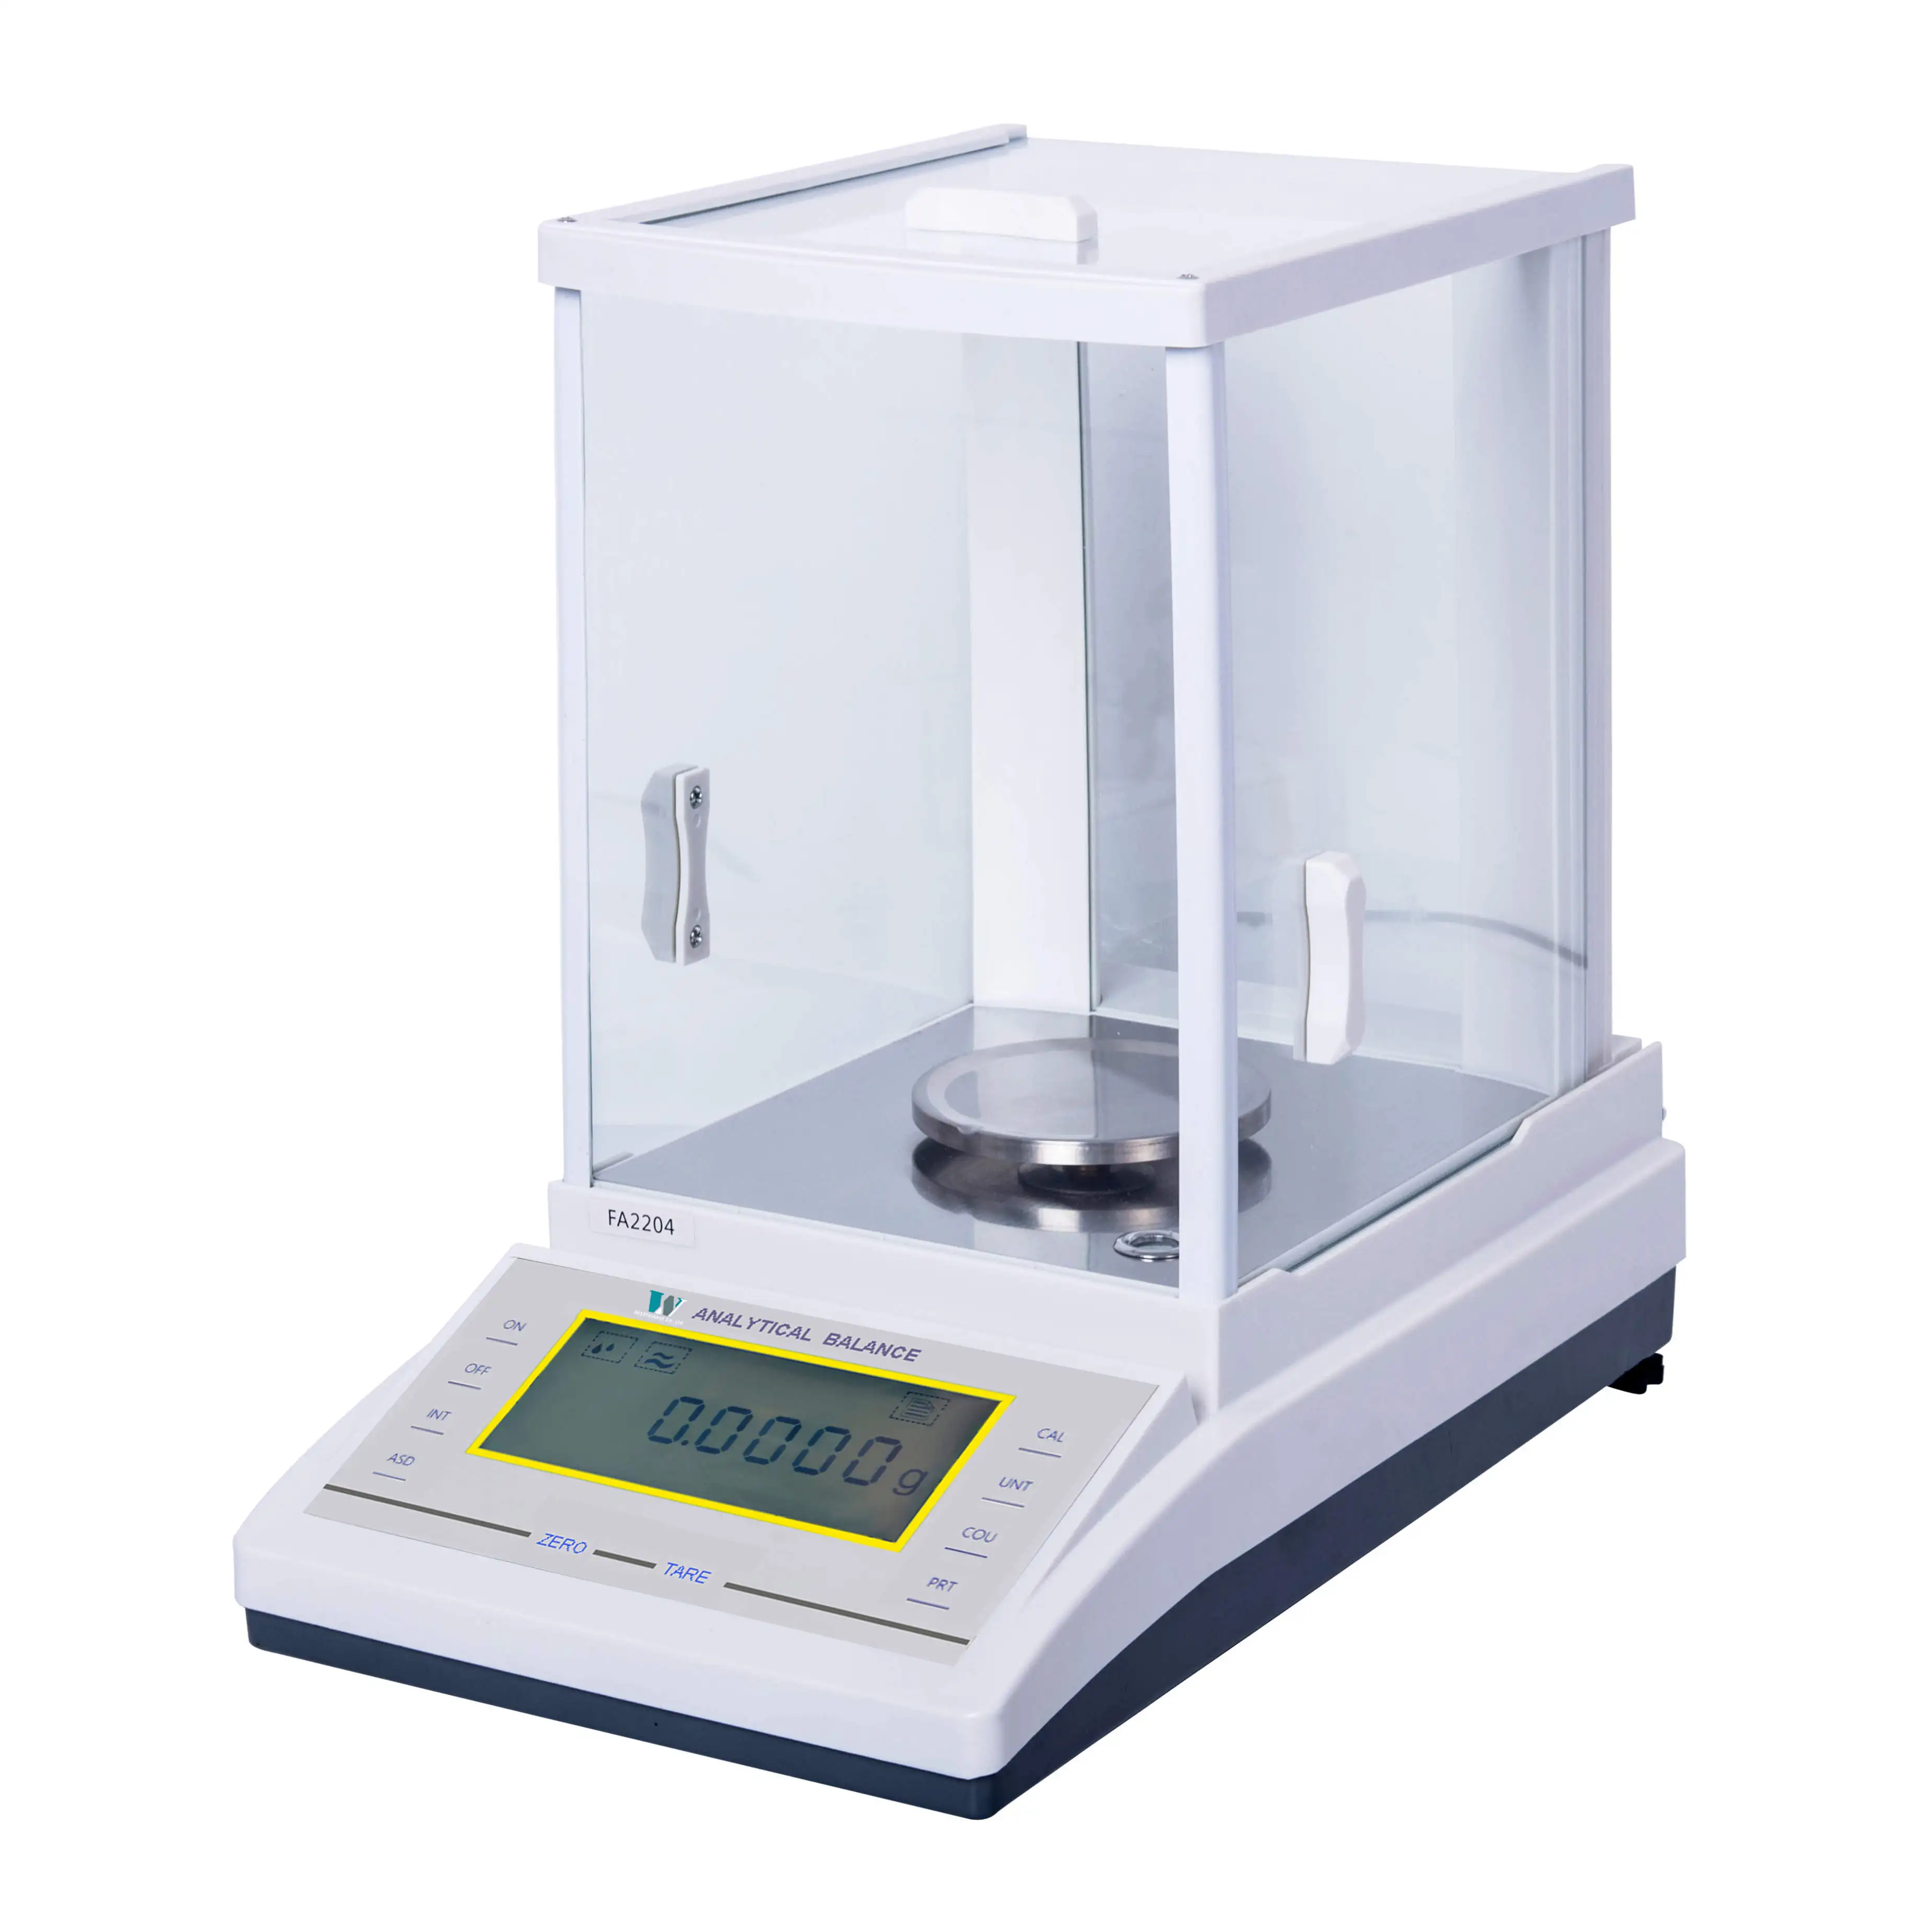 

FREE SHIPPING 0.1mg 220g Digital Laboratory Analytical 0.0001g Weighing 100g Scale